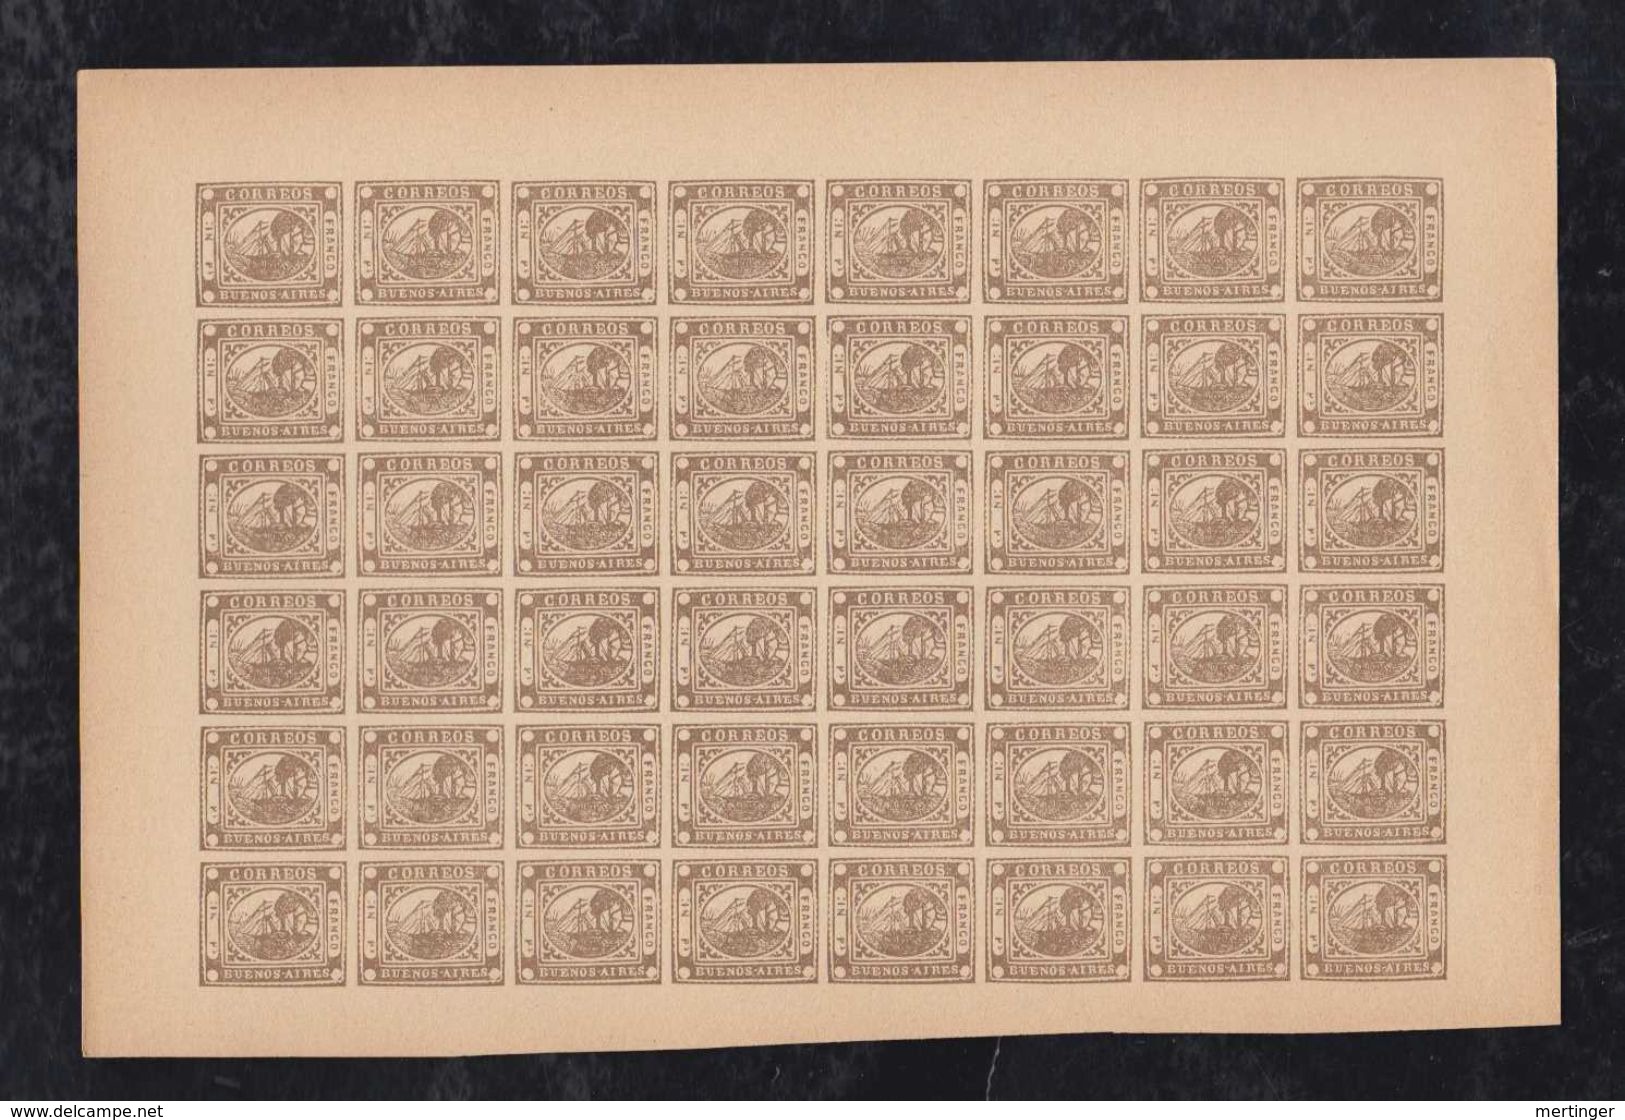 Argentina Buenos Aires 1858 BARQUITOS steamer  Mi# 1-8 SPIRO fakes forgery in 8 sheet of 48